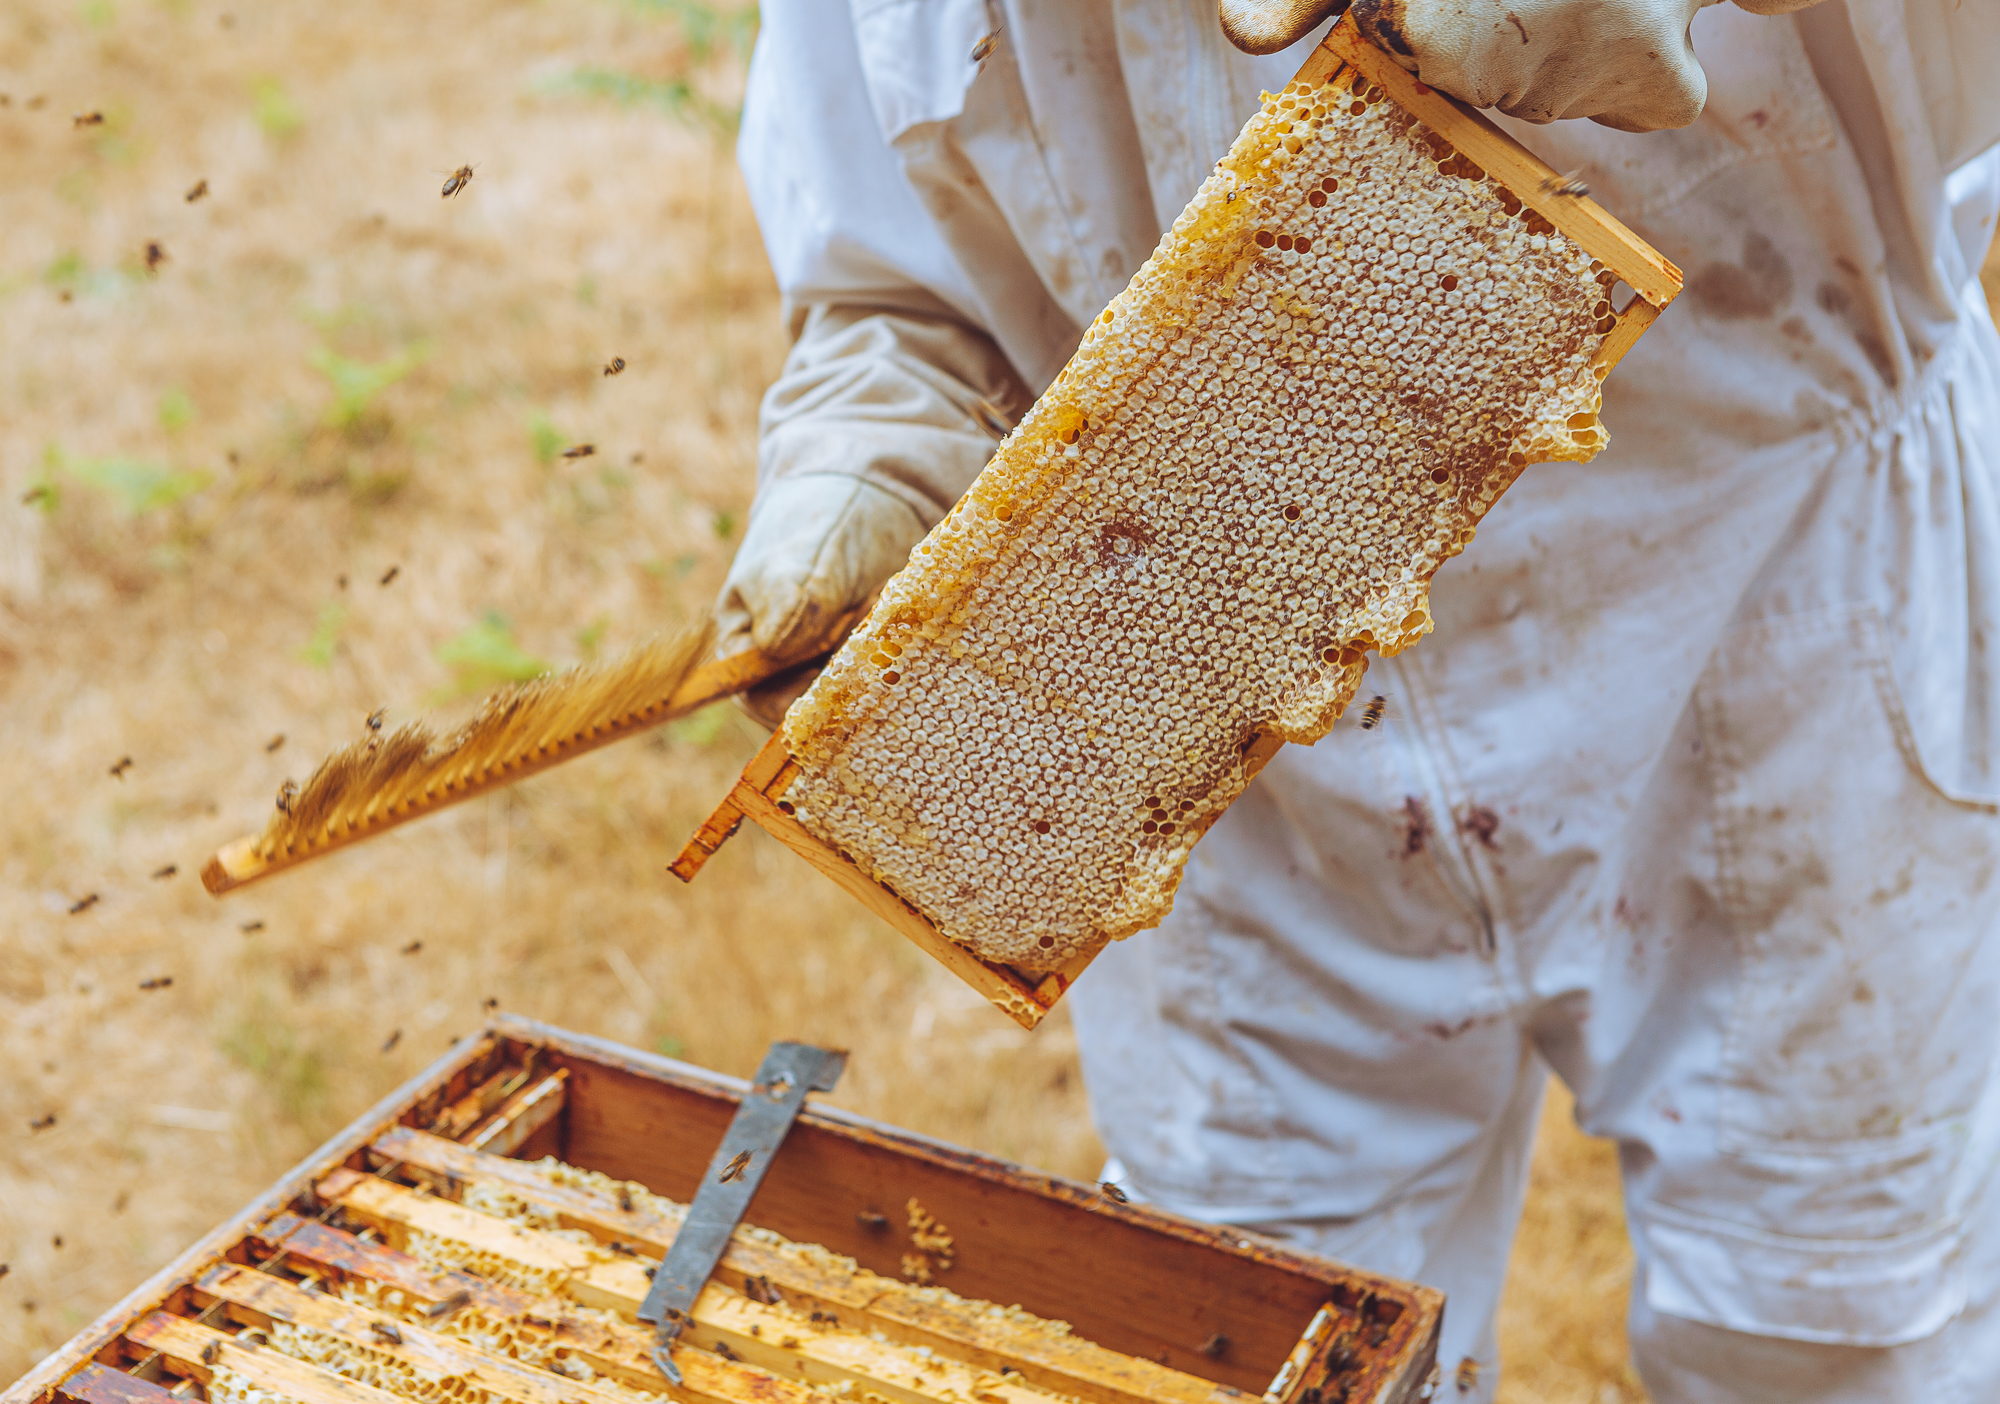 Hive - removing frames